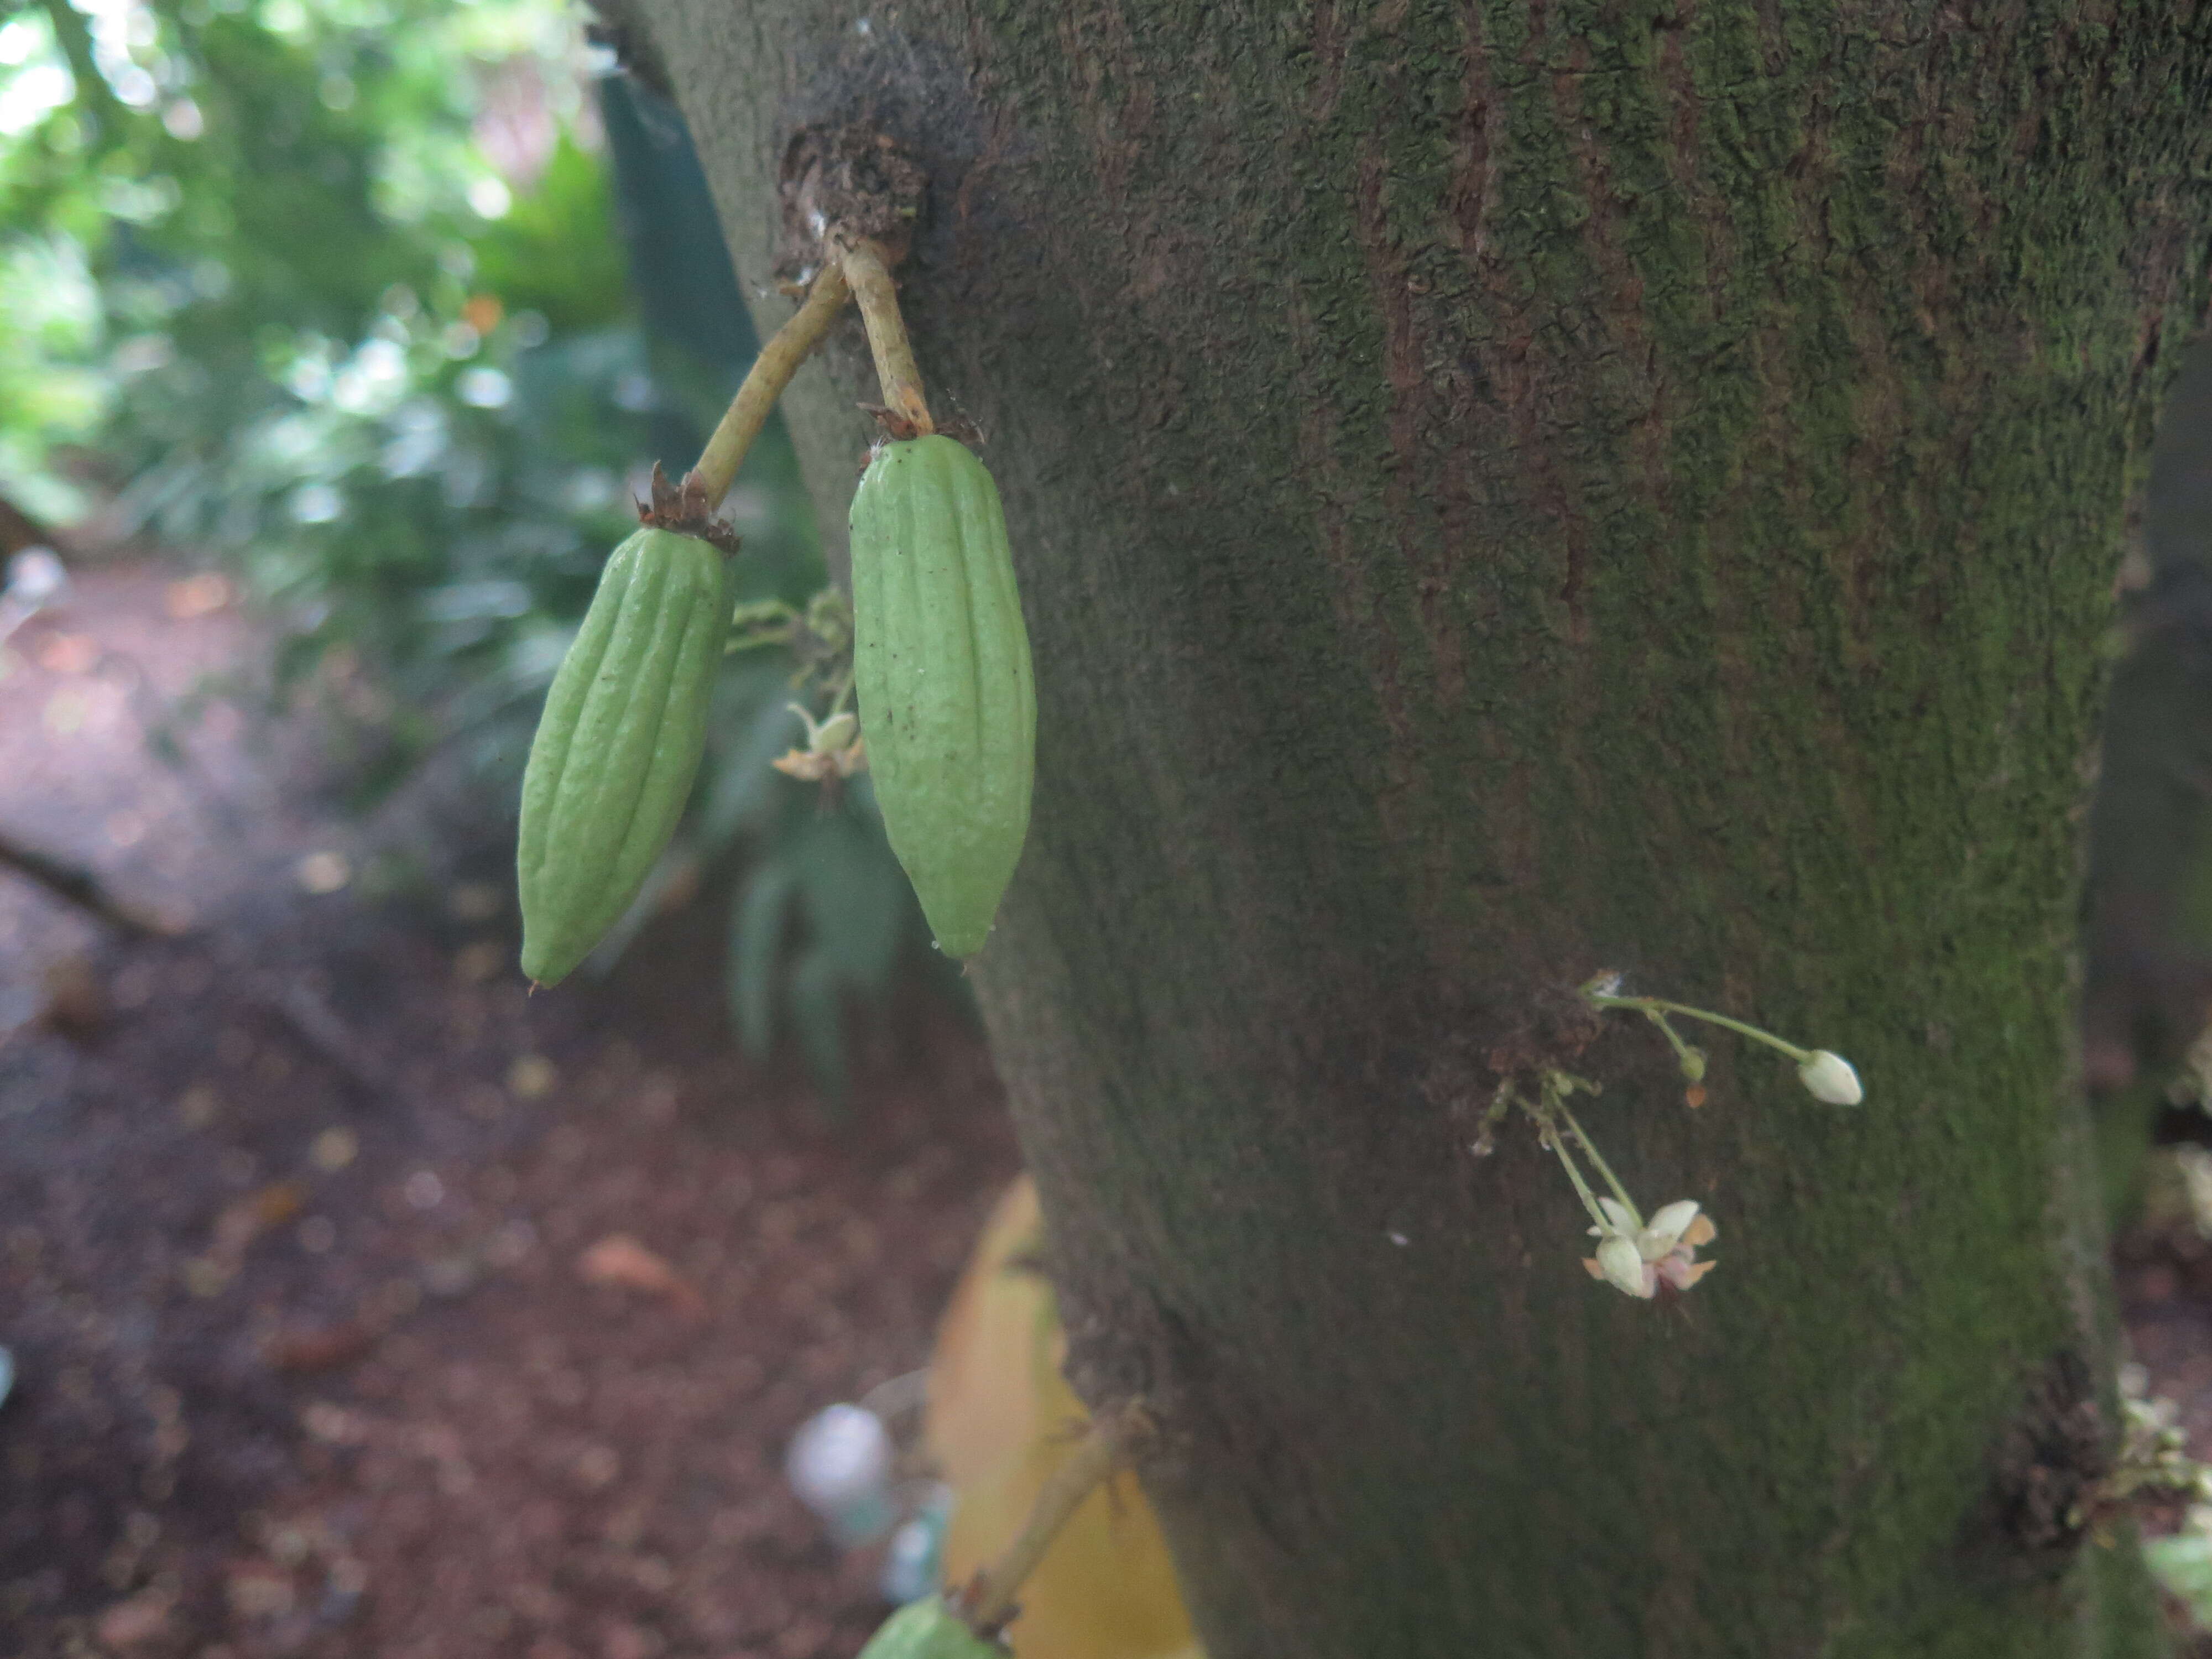 Image of cacao